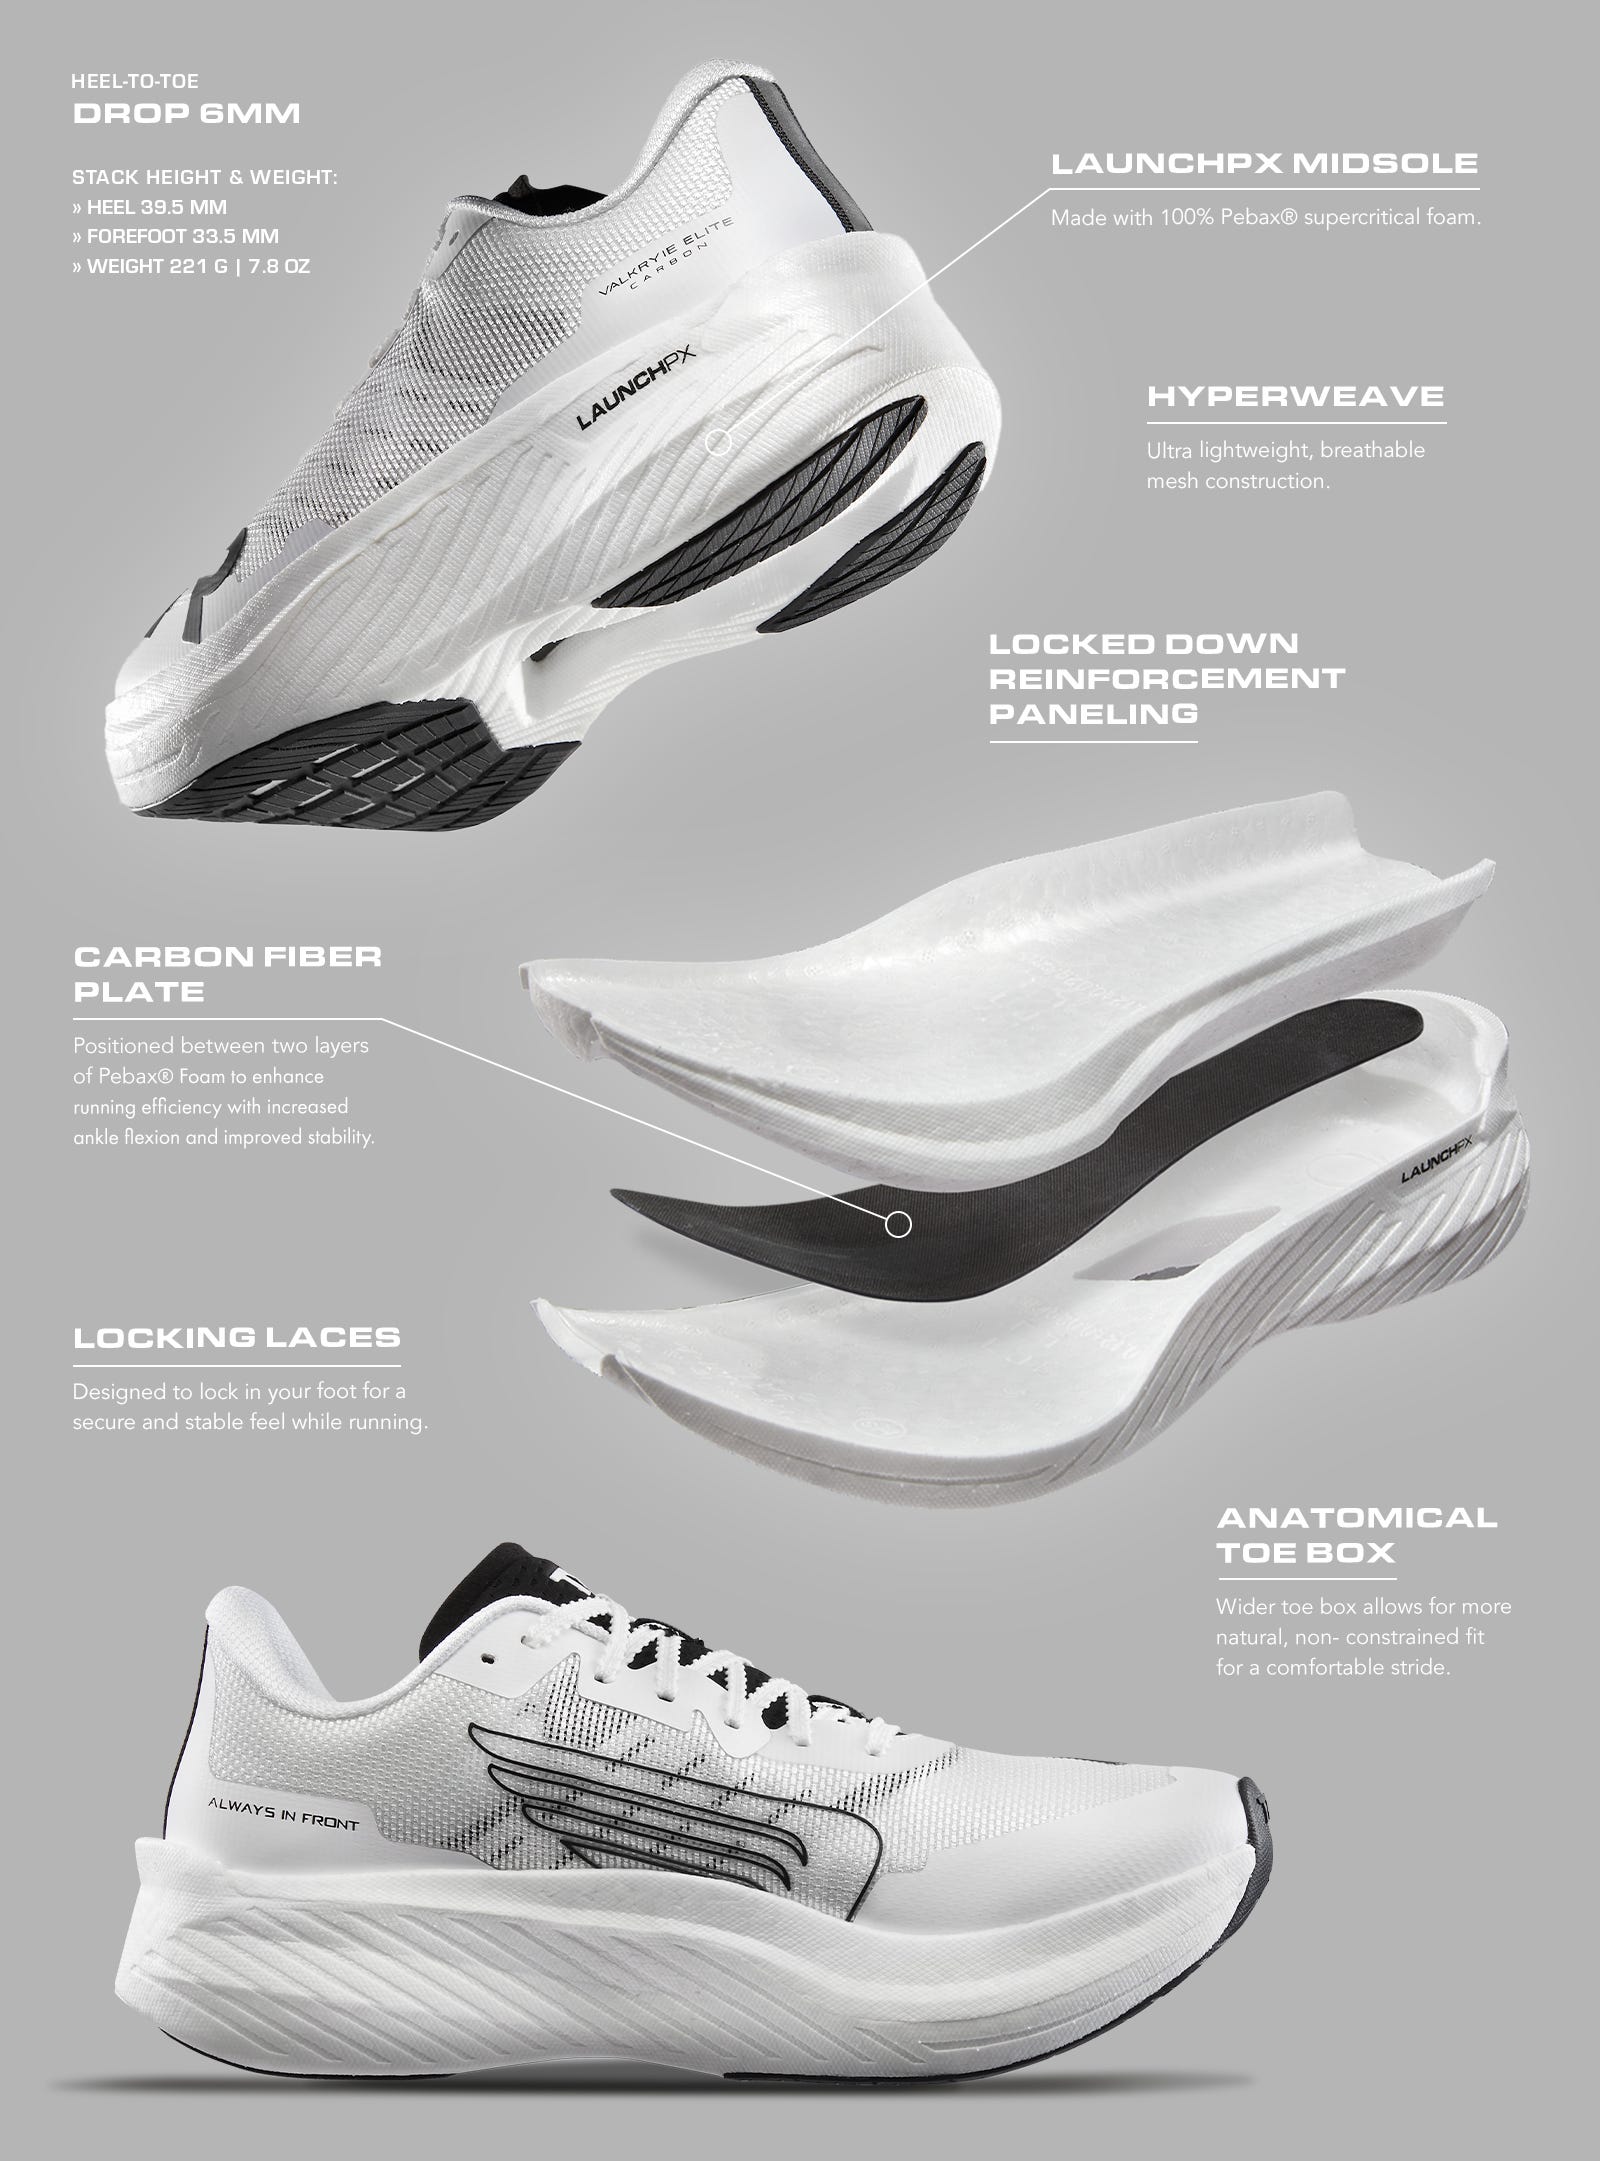 HEEL-TO-TOE DROP 6MM STACK HEIGHT & WEIGHT: HEEL 39.5 MM FOREFOOT 33.5 MM WEIGHT 221 G / 7.8 OZ" "LAUNCHPX MIDSOLE Made with 100% Pebax® supercritical foam." "HYPERWEAVE Ultra lightweight, breathable mesh construction." "LOCKED DOWN REINFORCEMENT PANE